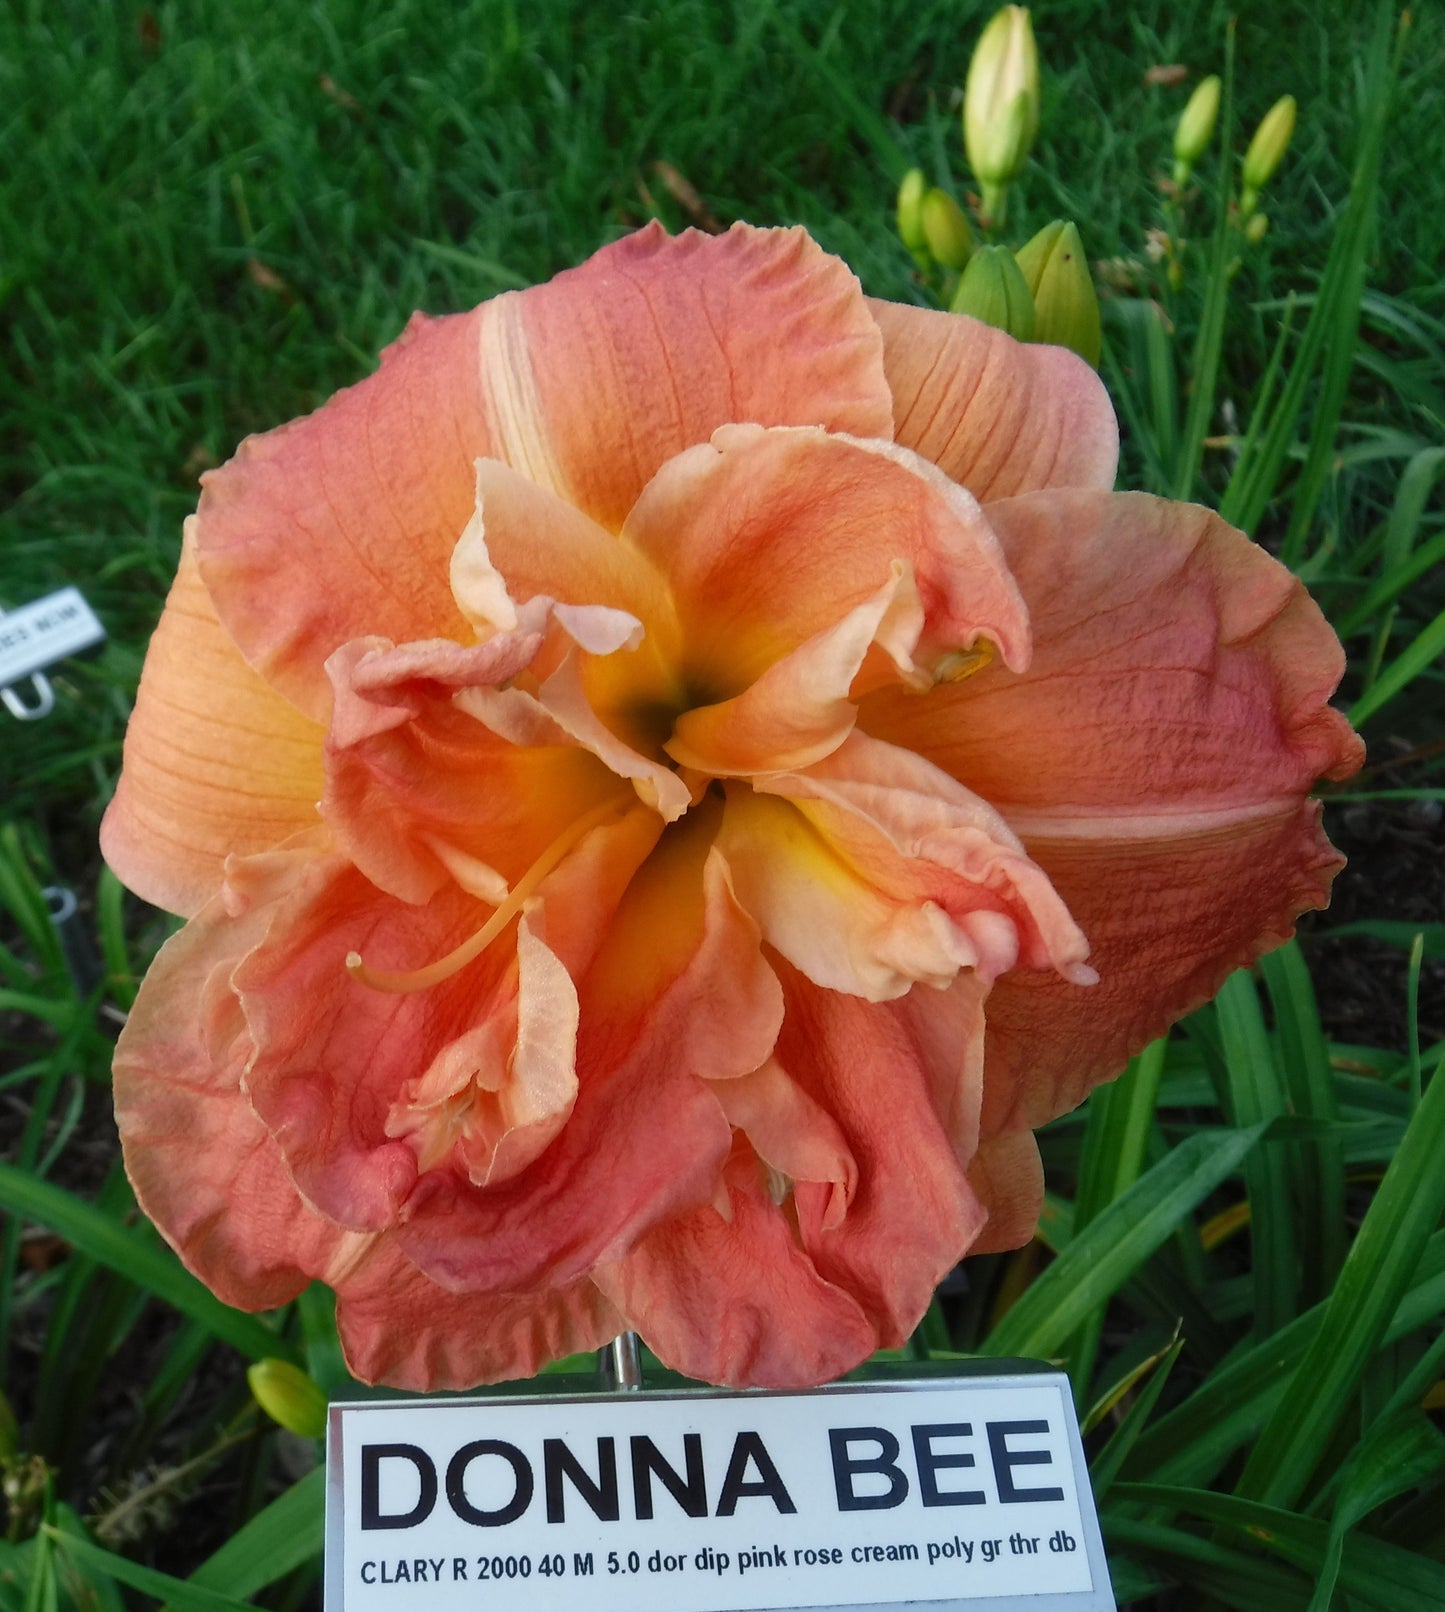 DONNA BEE